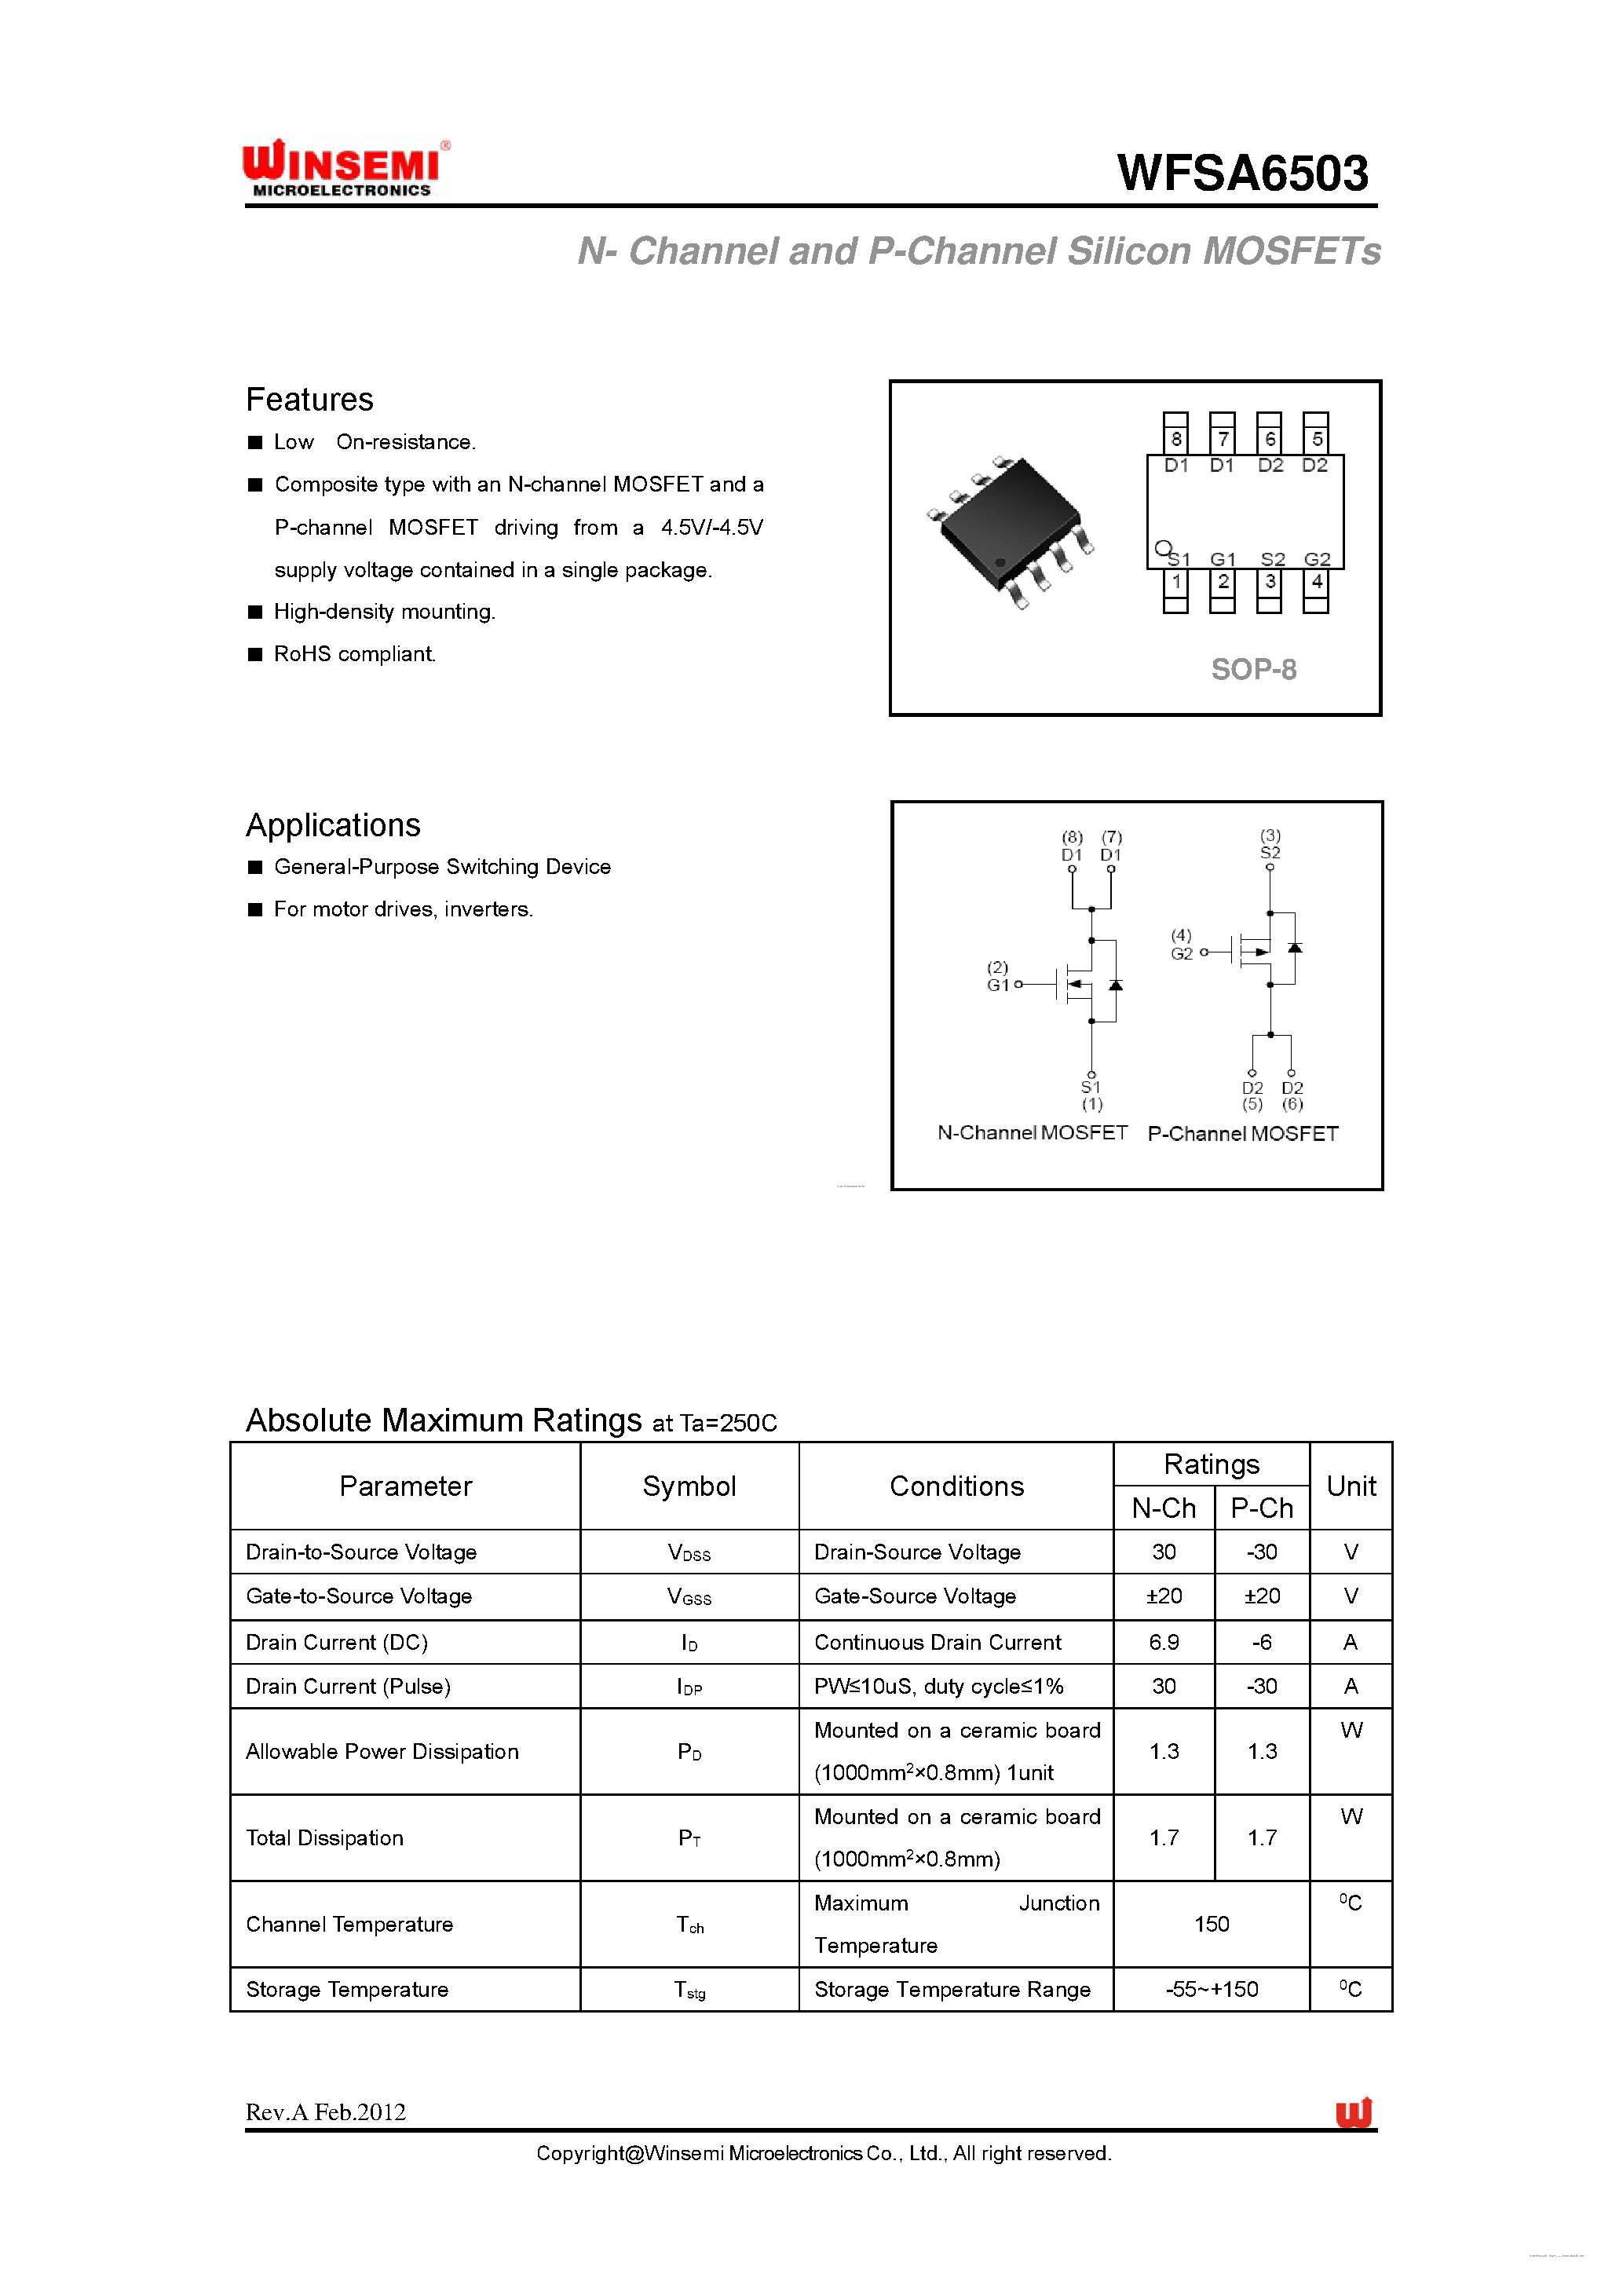 Даташит WFSA6503 - N- Channel and P-Channel Silicon MOSFETs страница 1